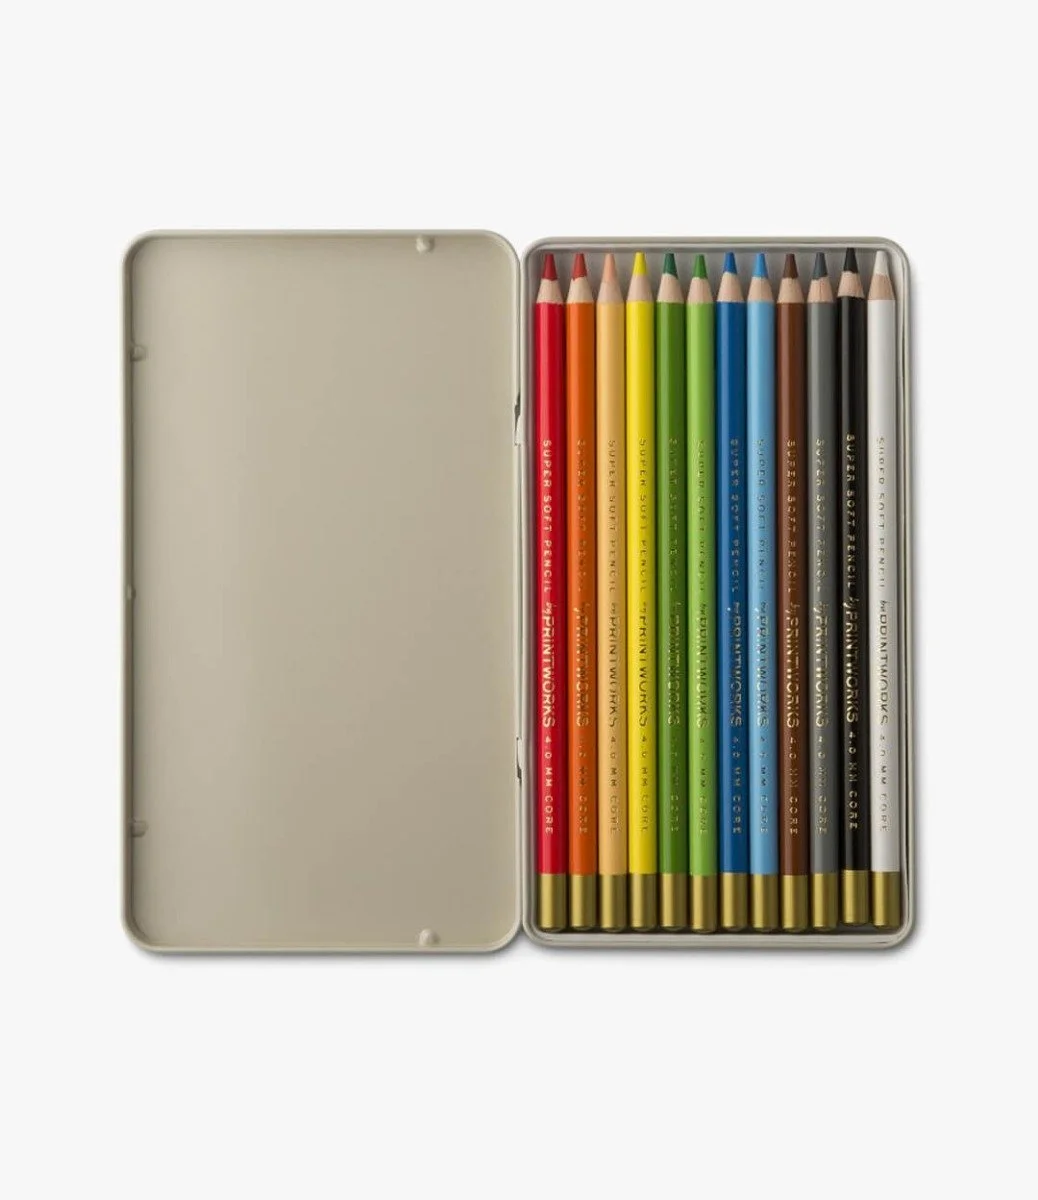 12 Classic Color Pencils by Printworks*